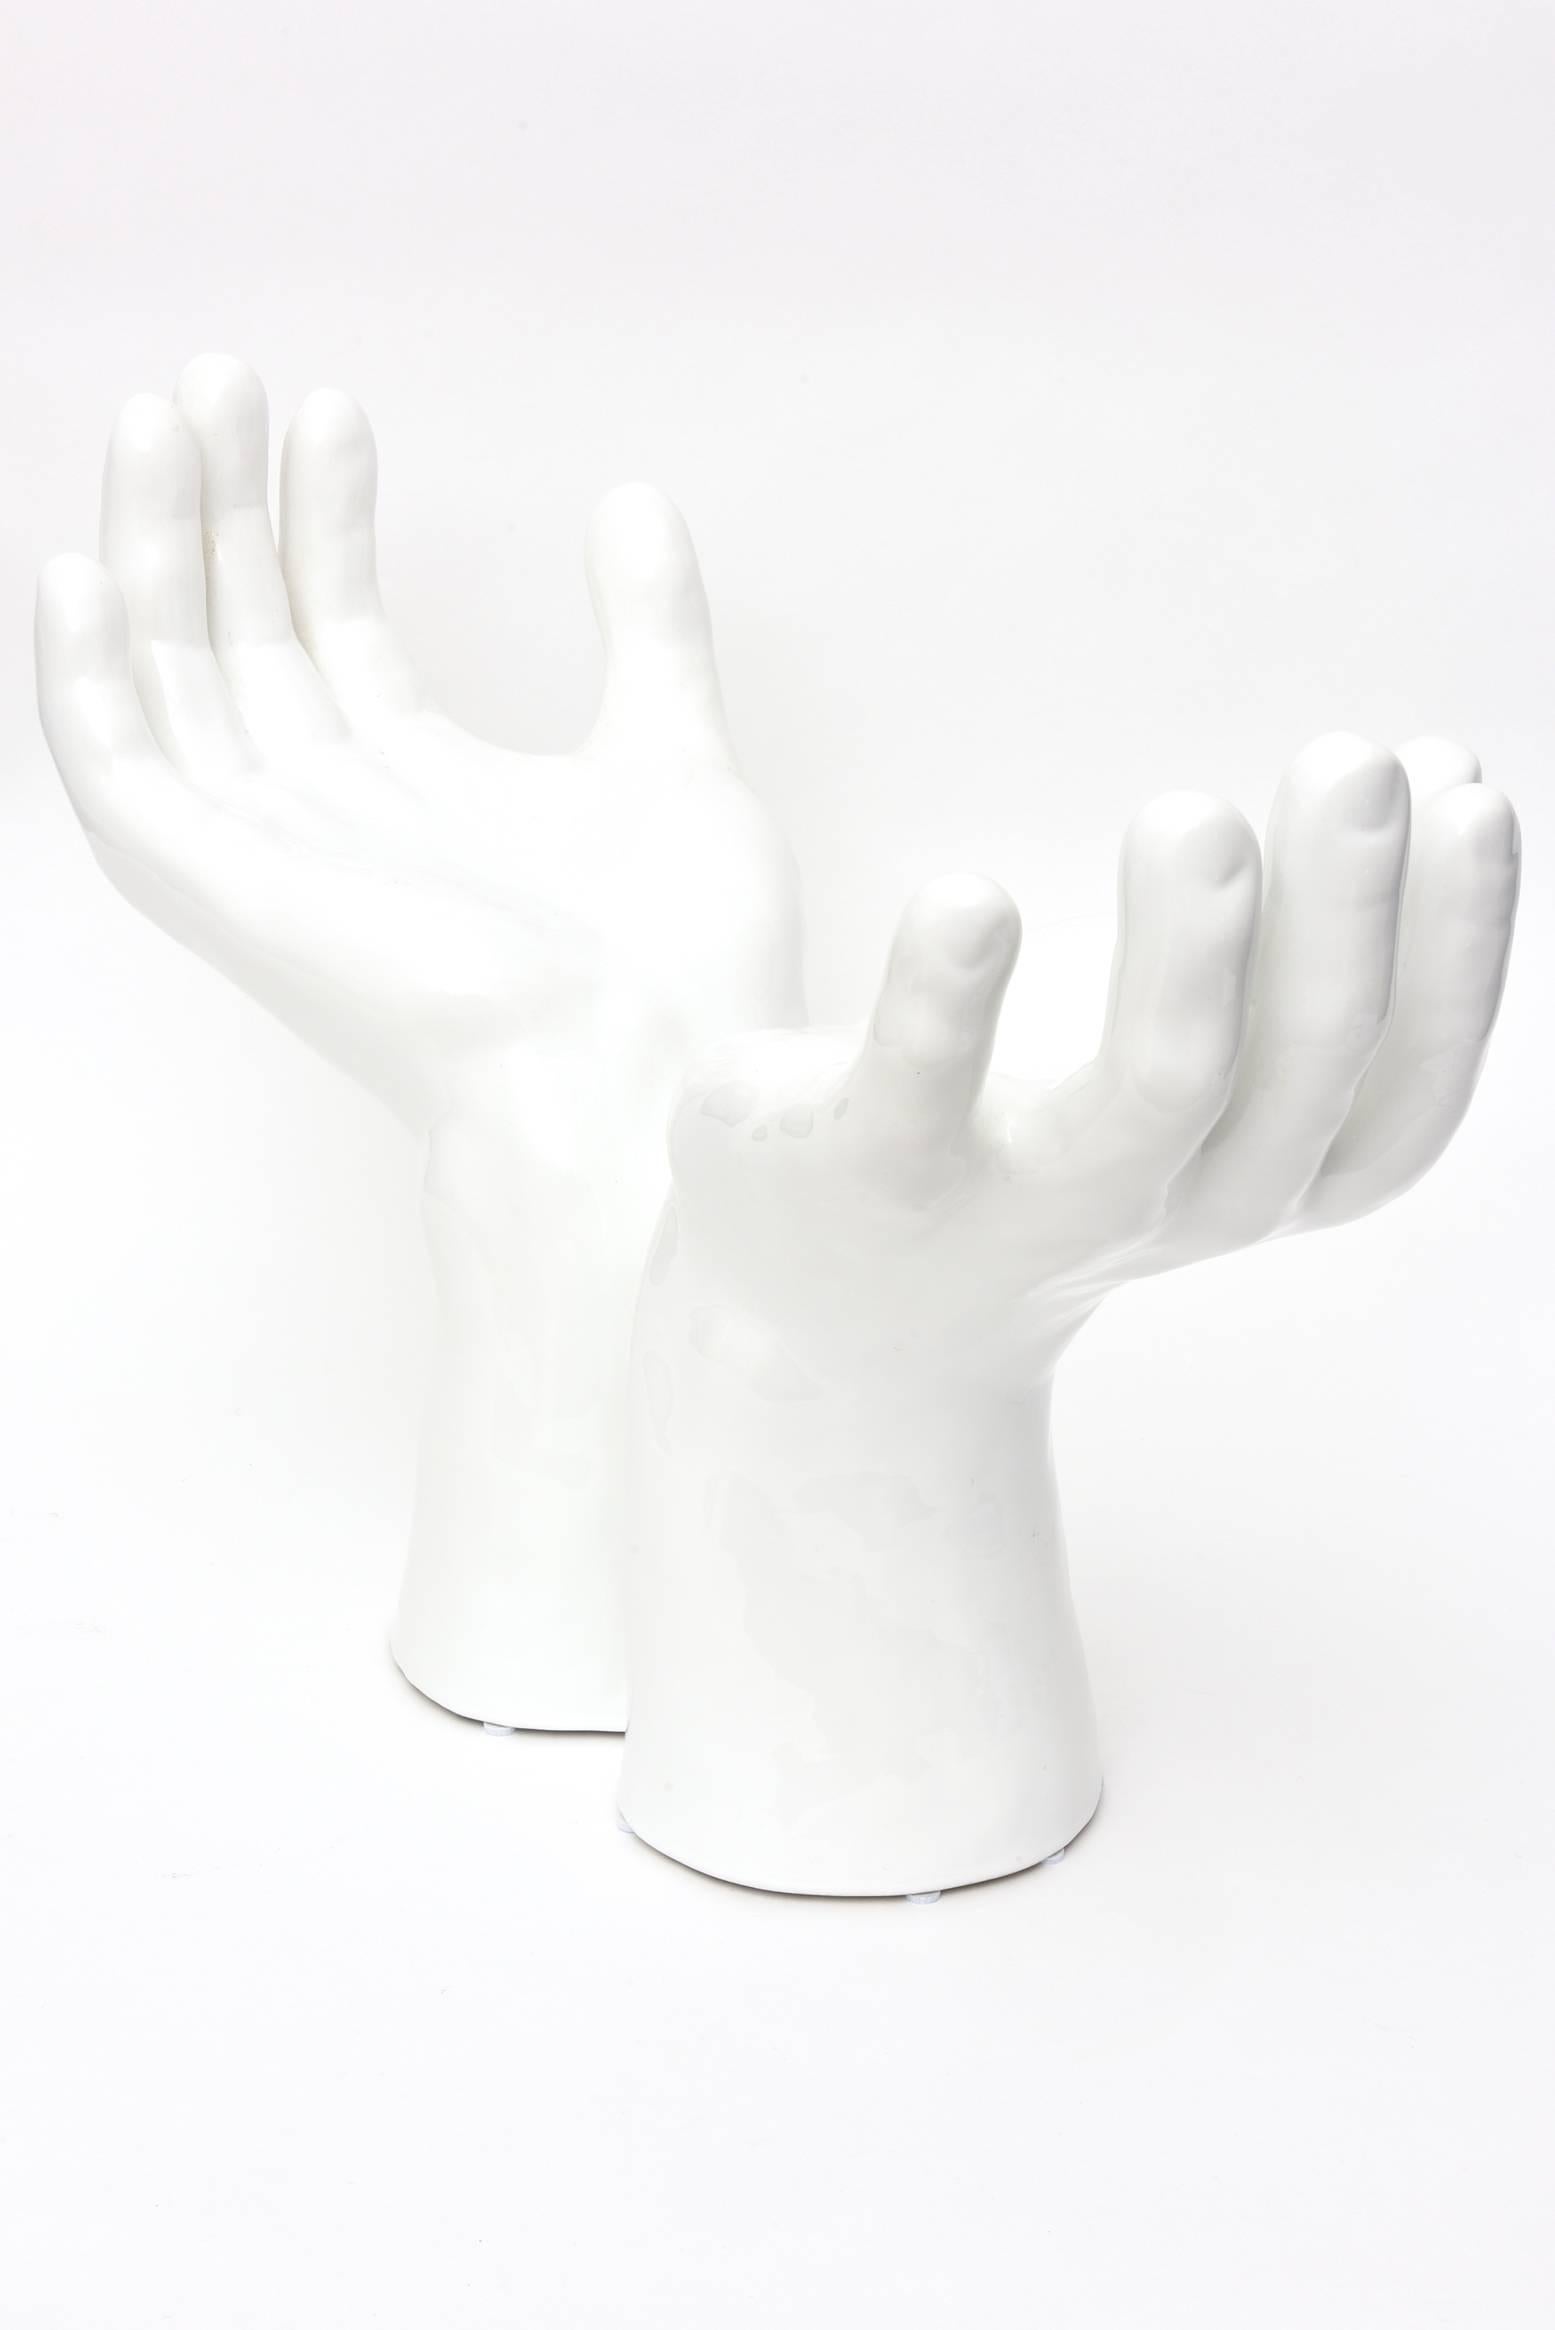 This wonderful Italian dramatic white glazed hands sculpture is an encompassing energy welcome object with outstretched large male hands. It is monumental and theatrical. This is from the 1970s. Does he have the world is his hands? The original